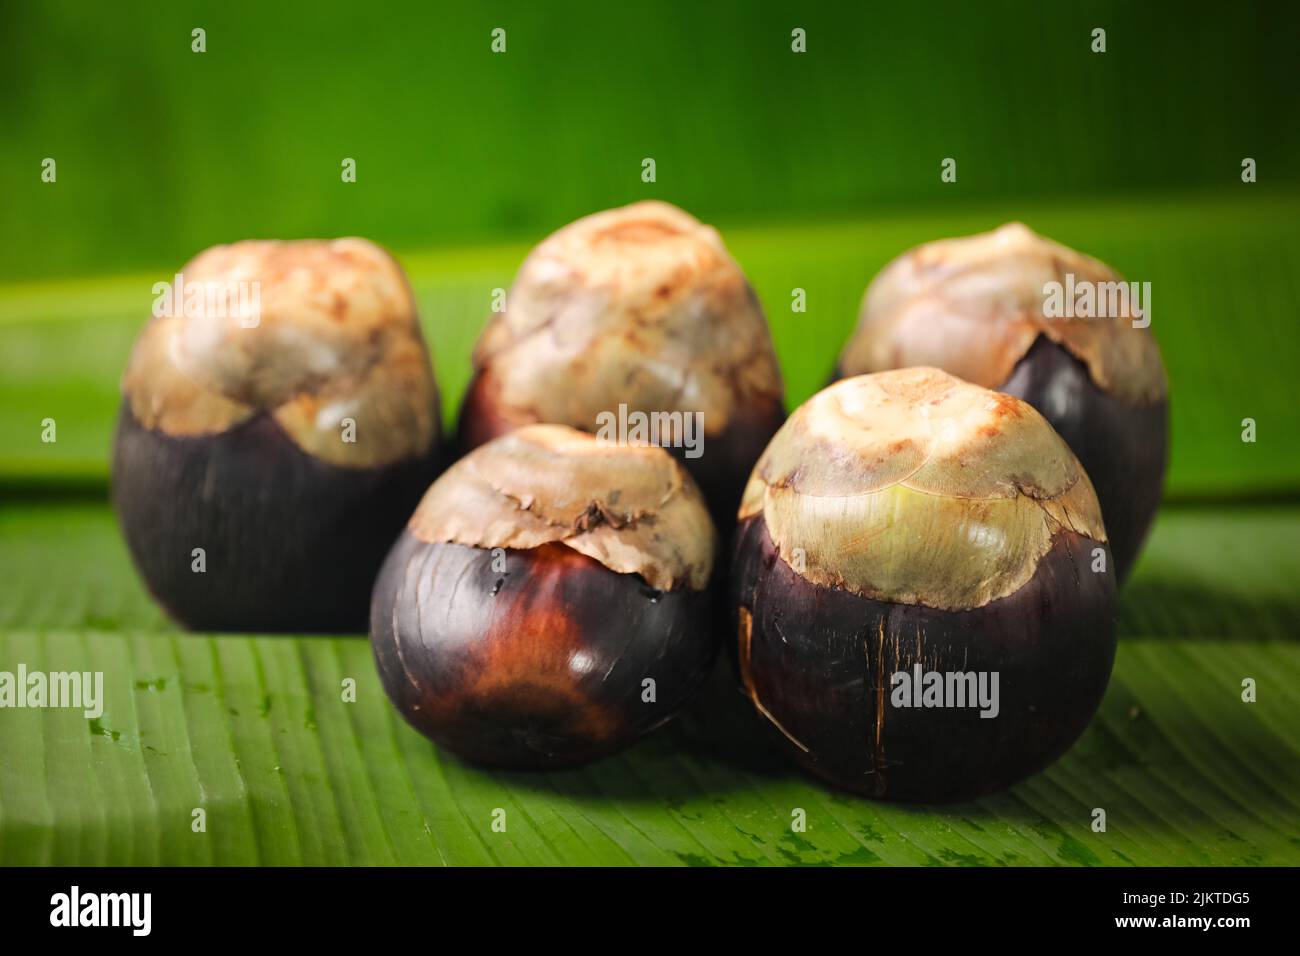 A closeup of gilled Chestnuts on a green surface Stock Photo